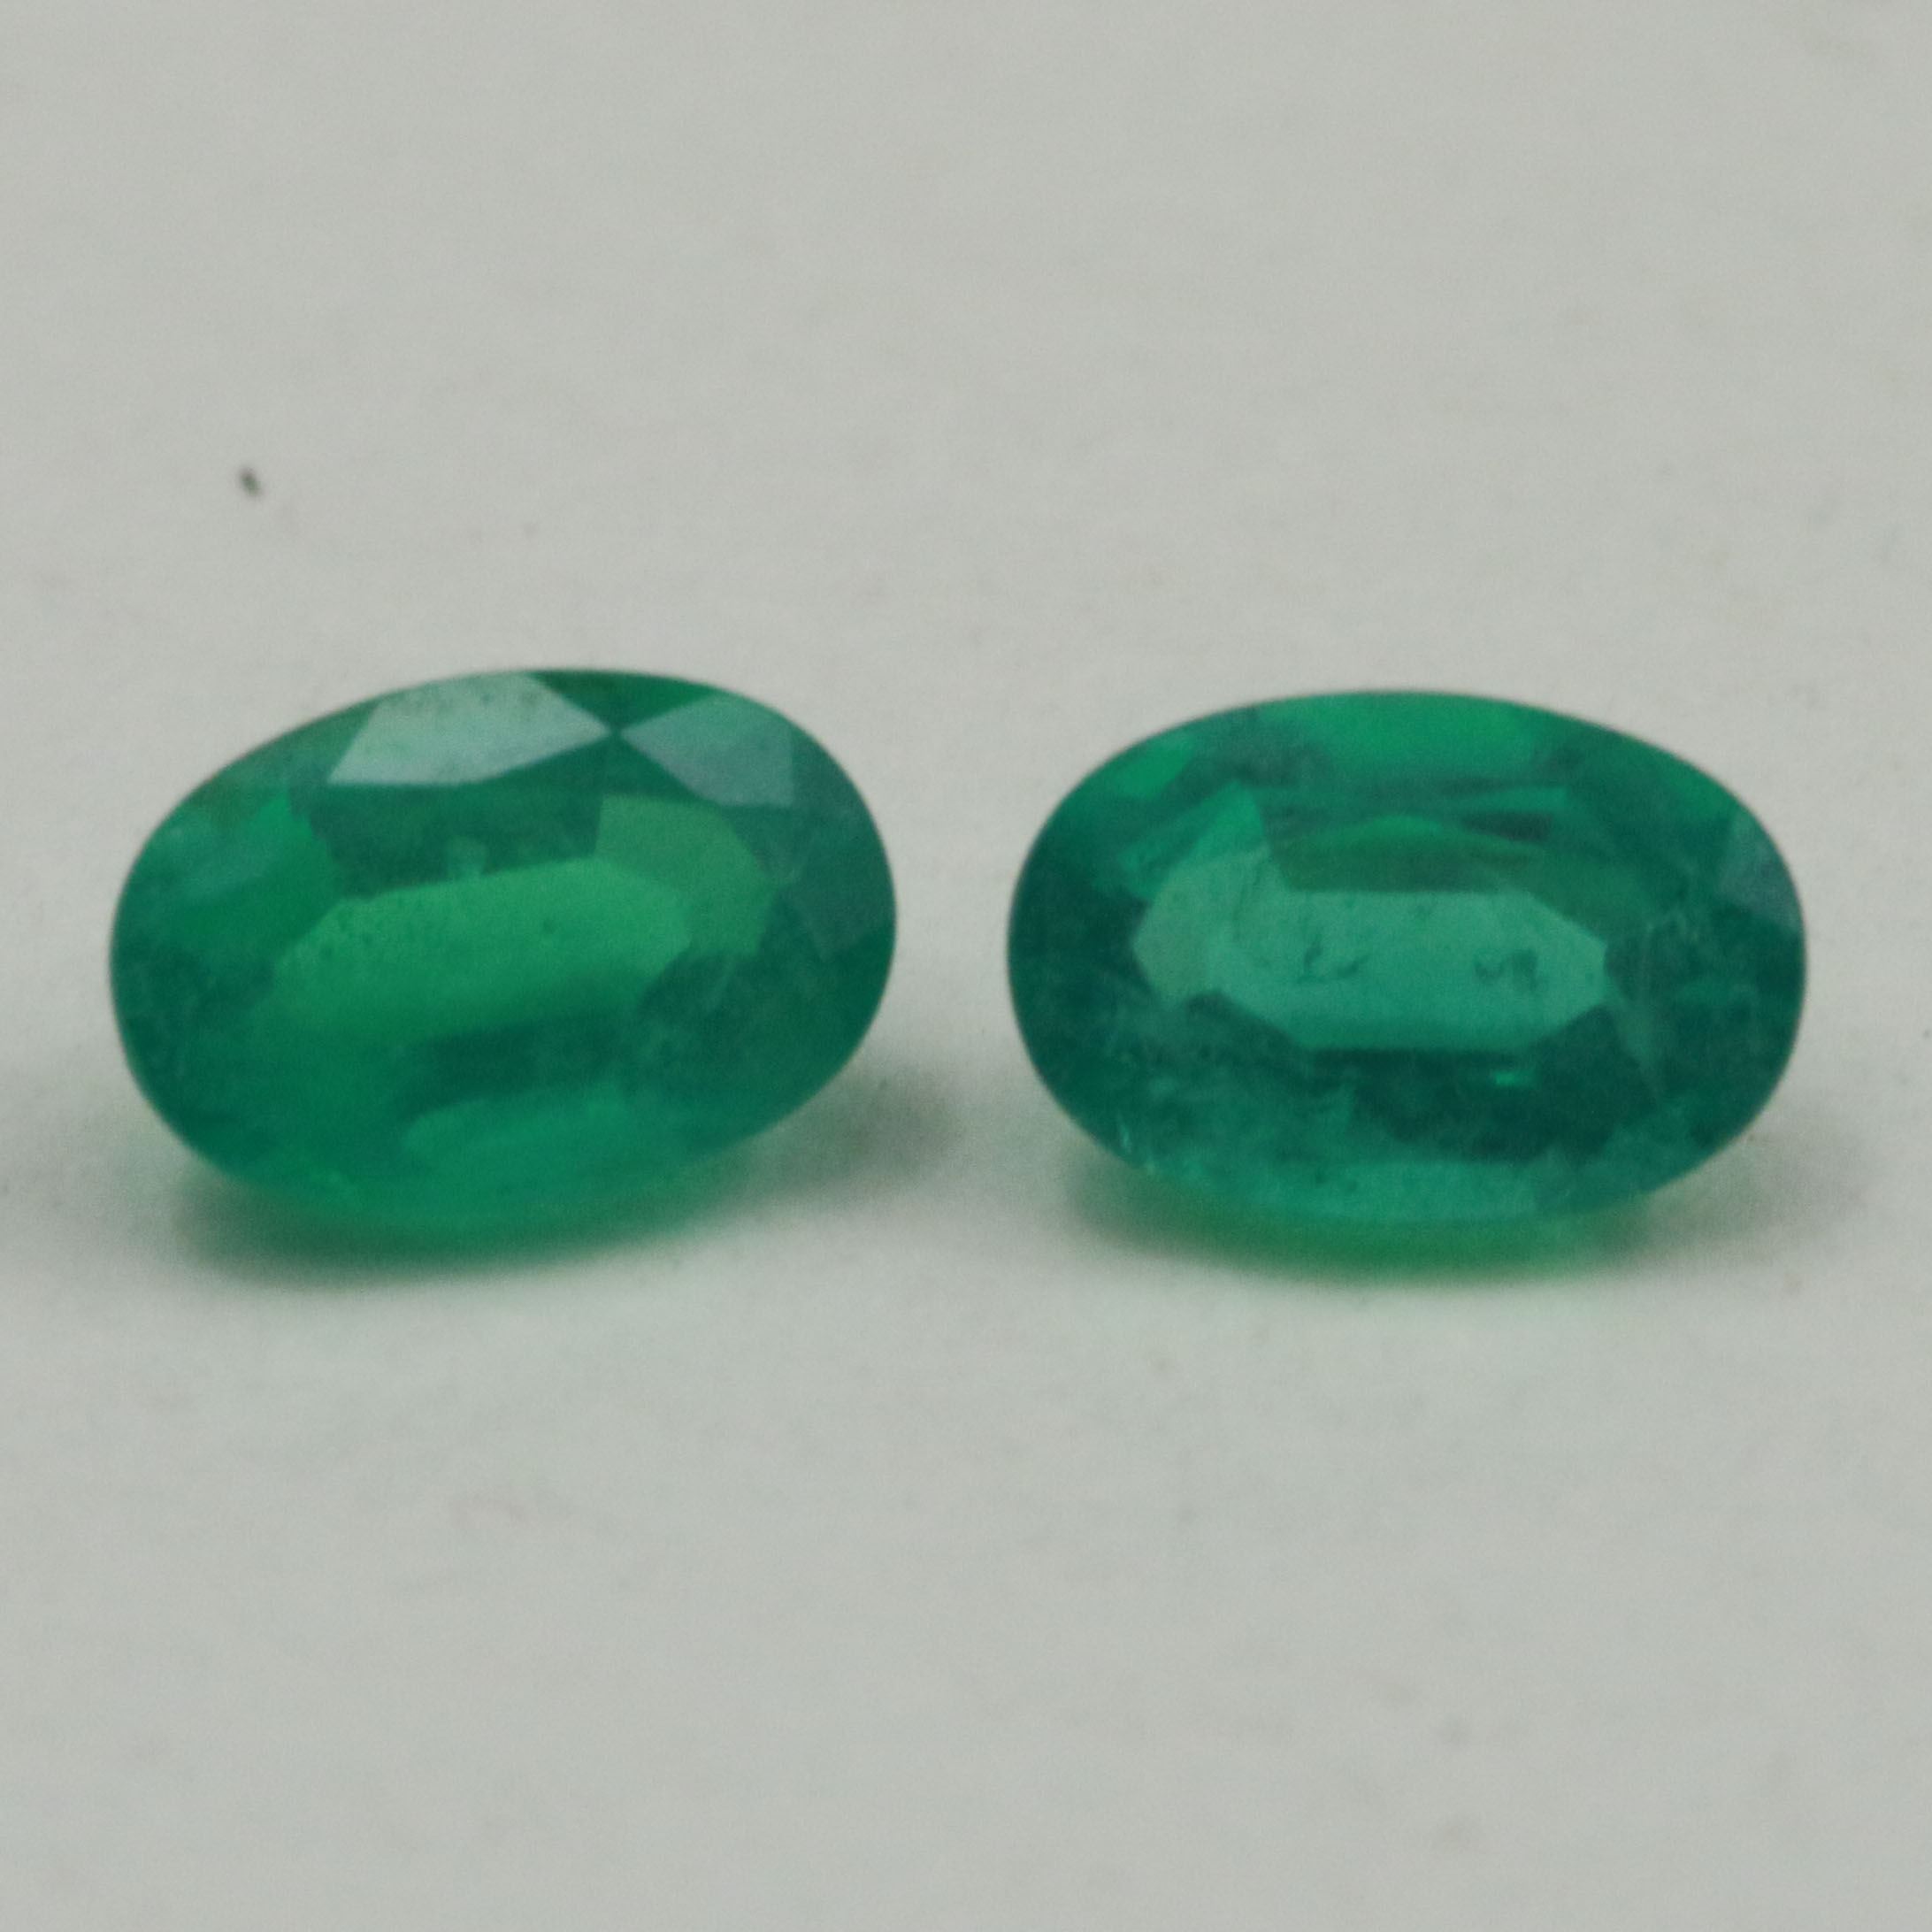 EMERALD PAIR 5.9X4 OVAL 0.83CT